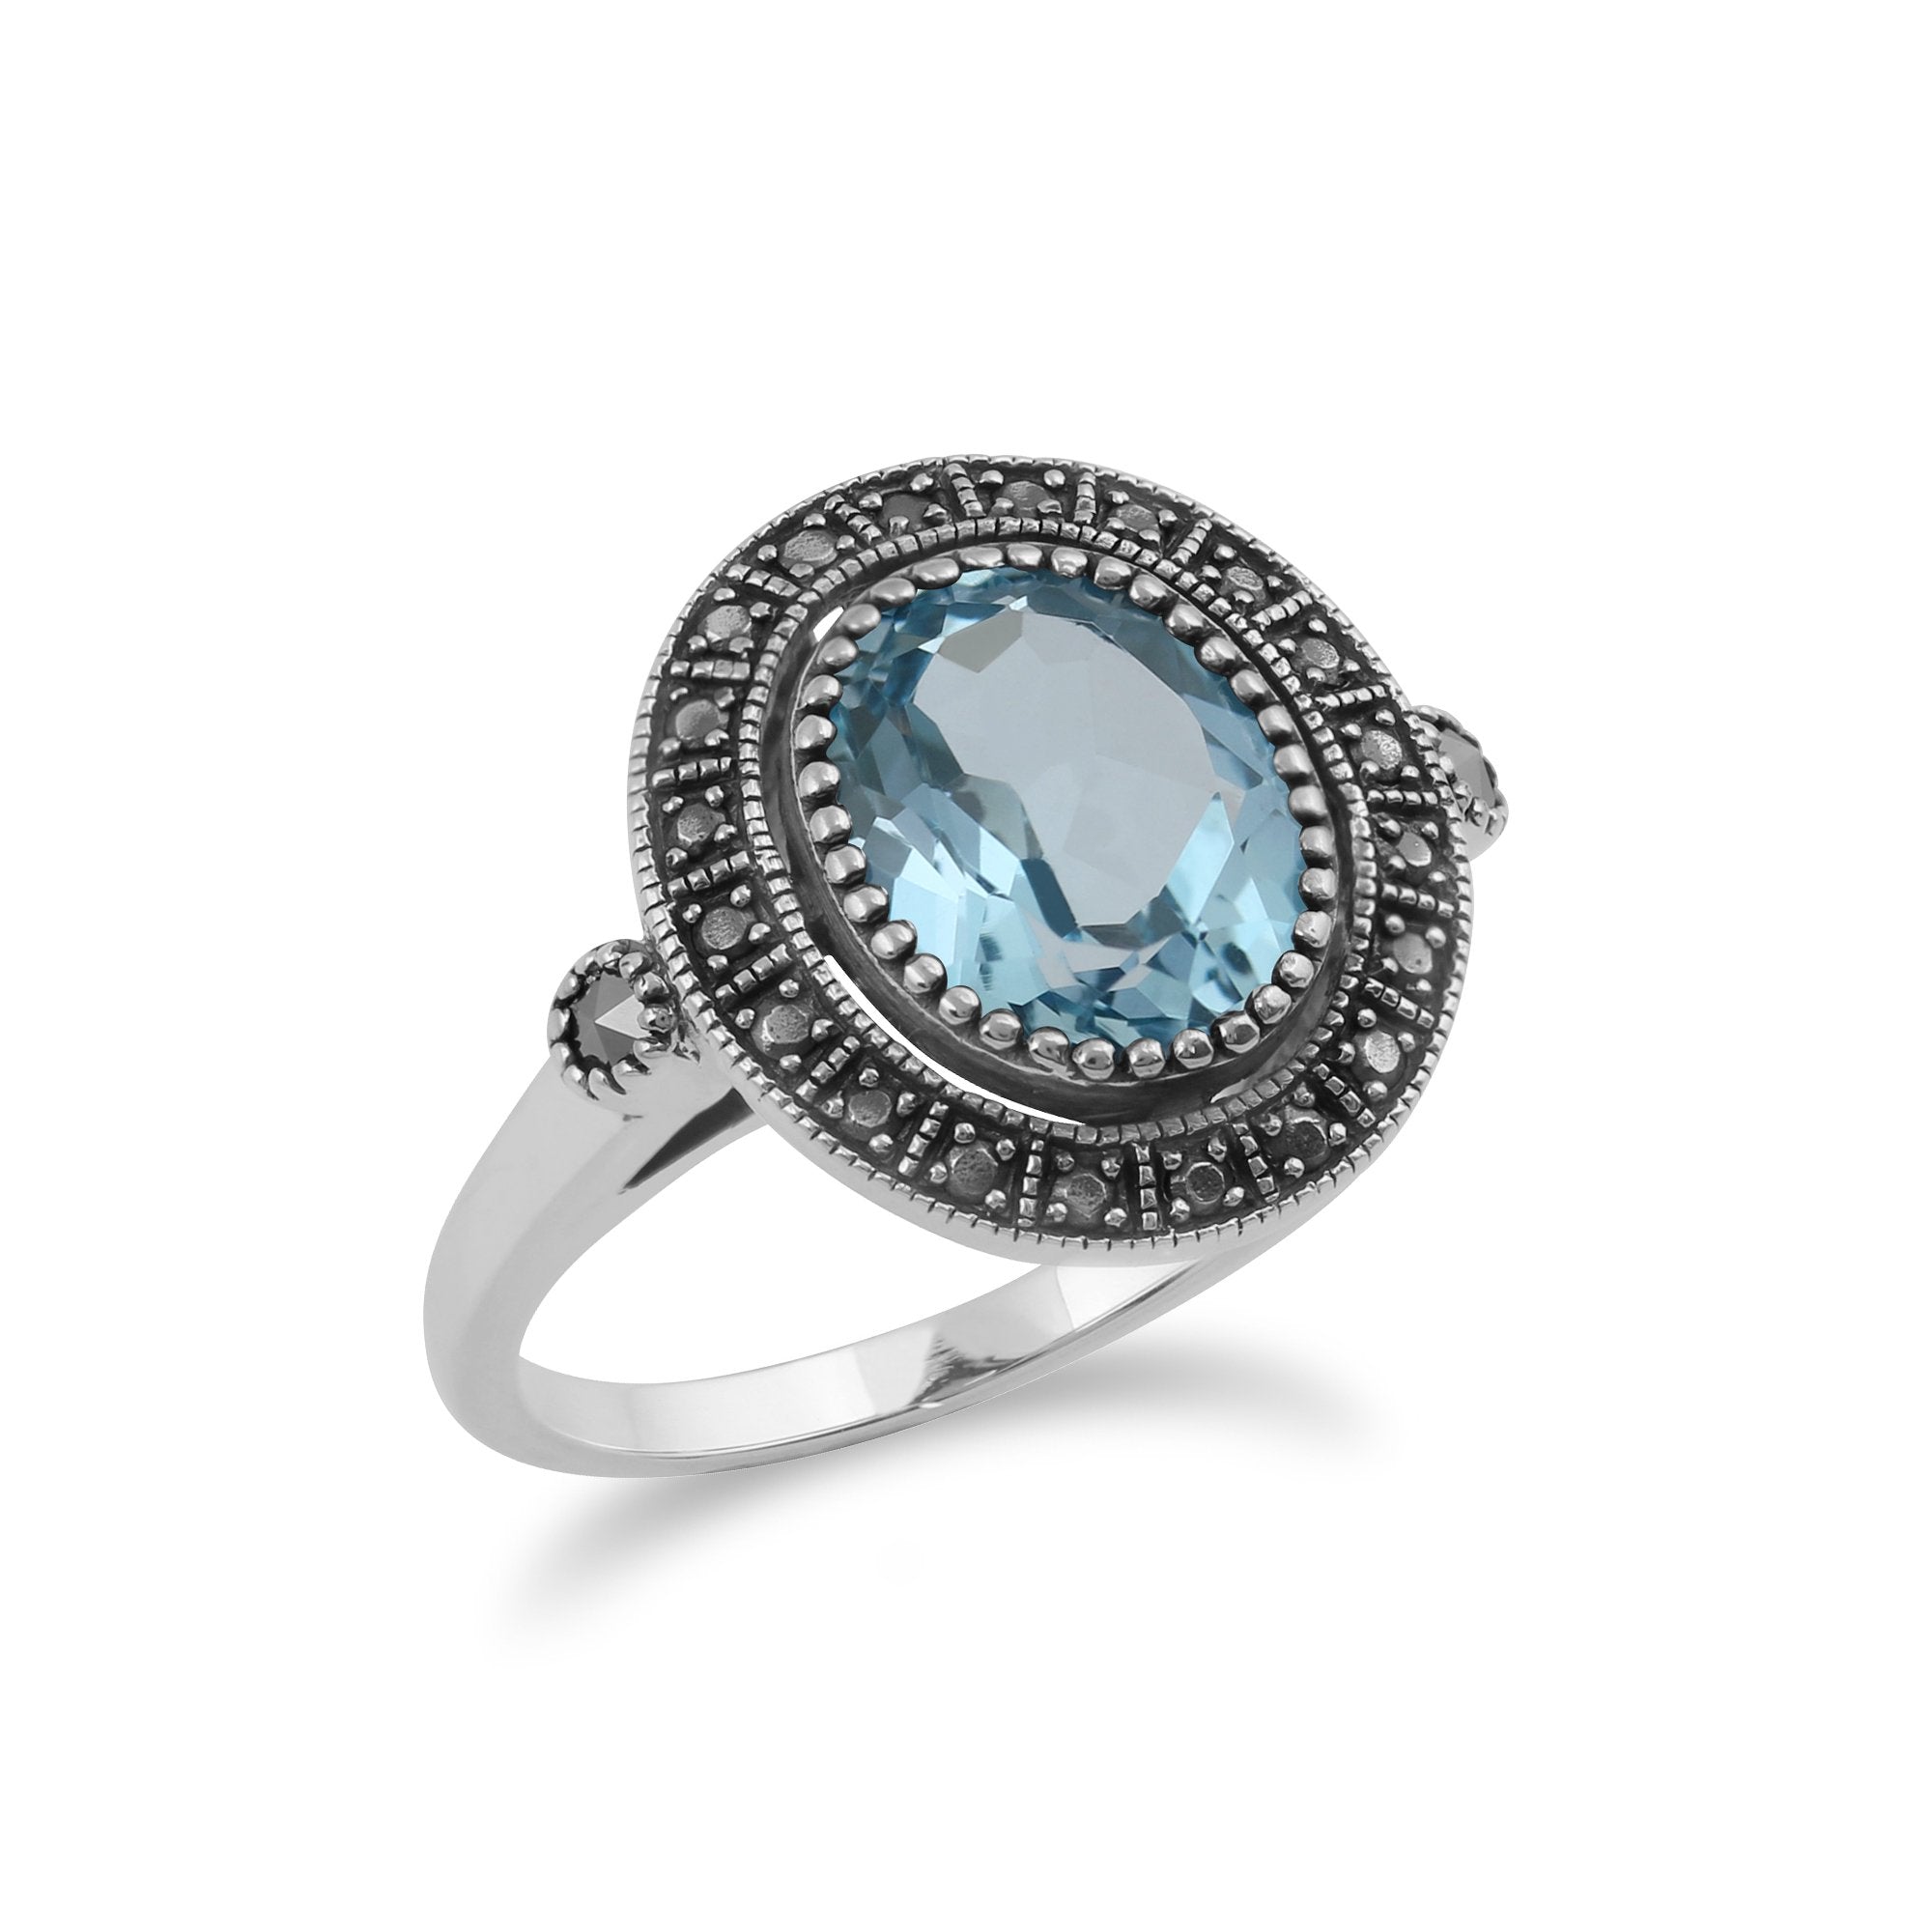 Art Deco Style Oval Blue Topaz & Marcasite Statement Cocktail Ring In Sterling Silver